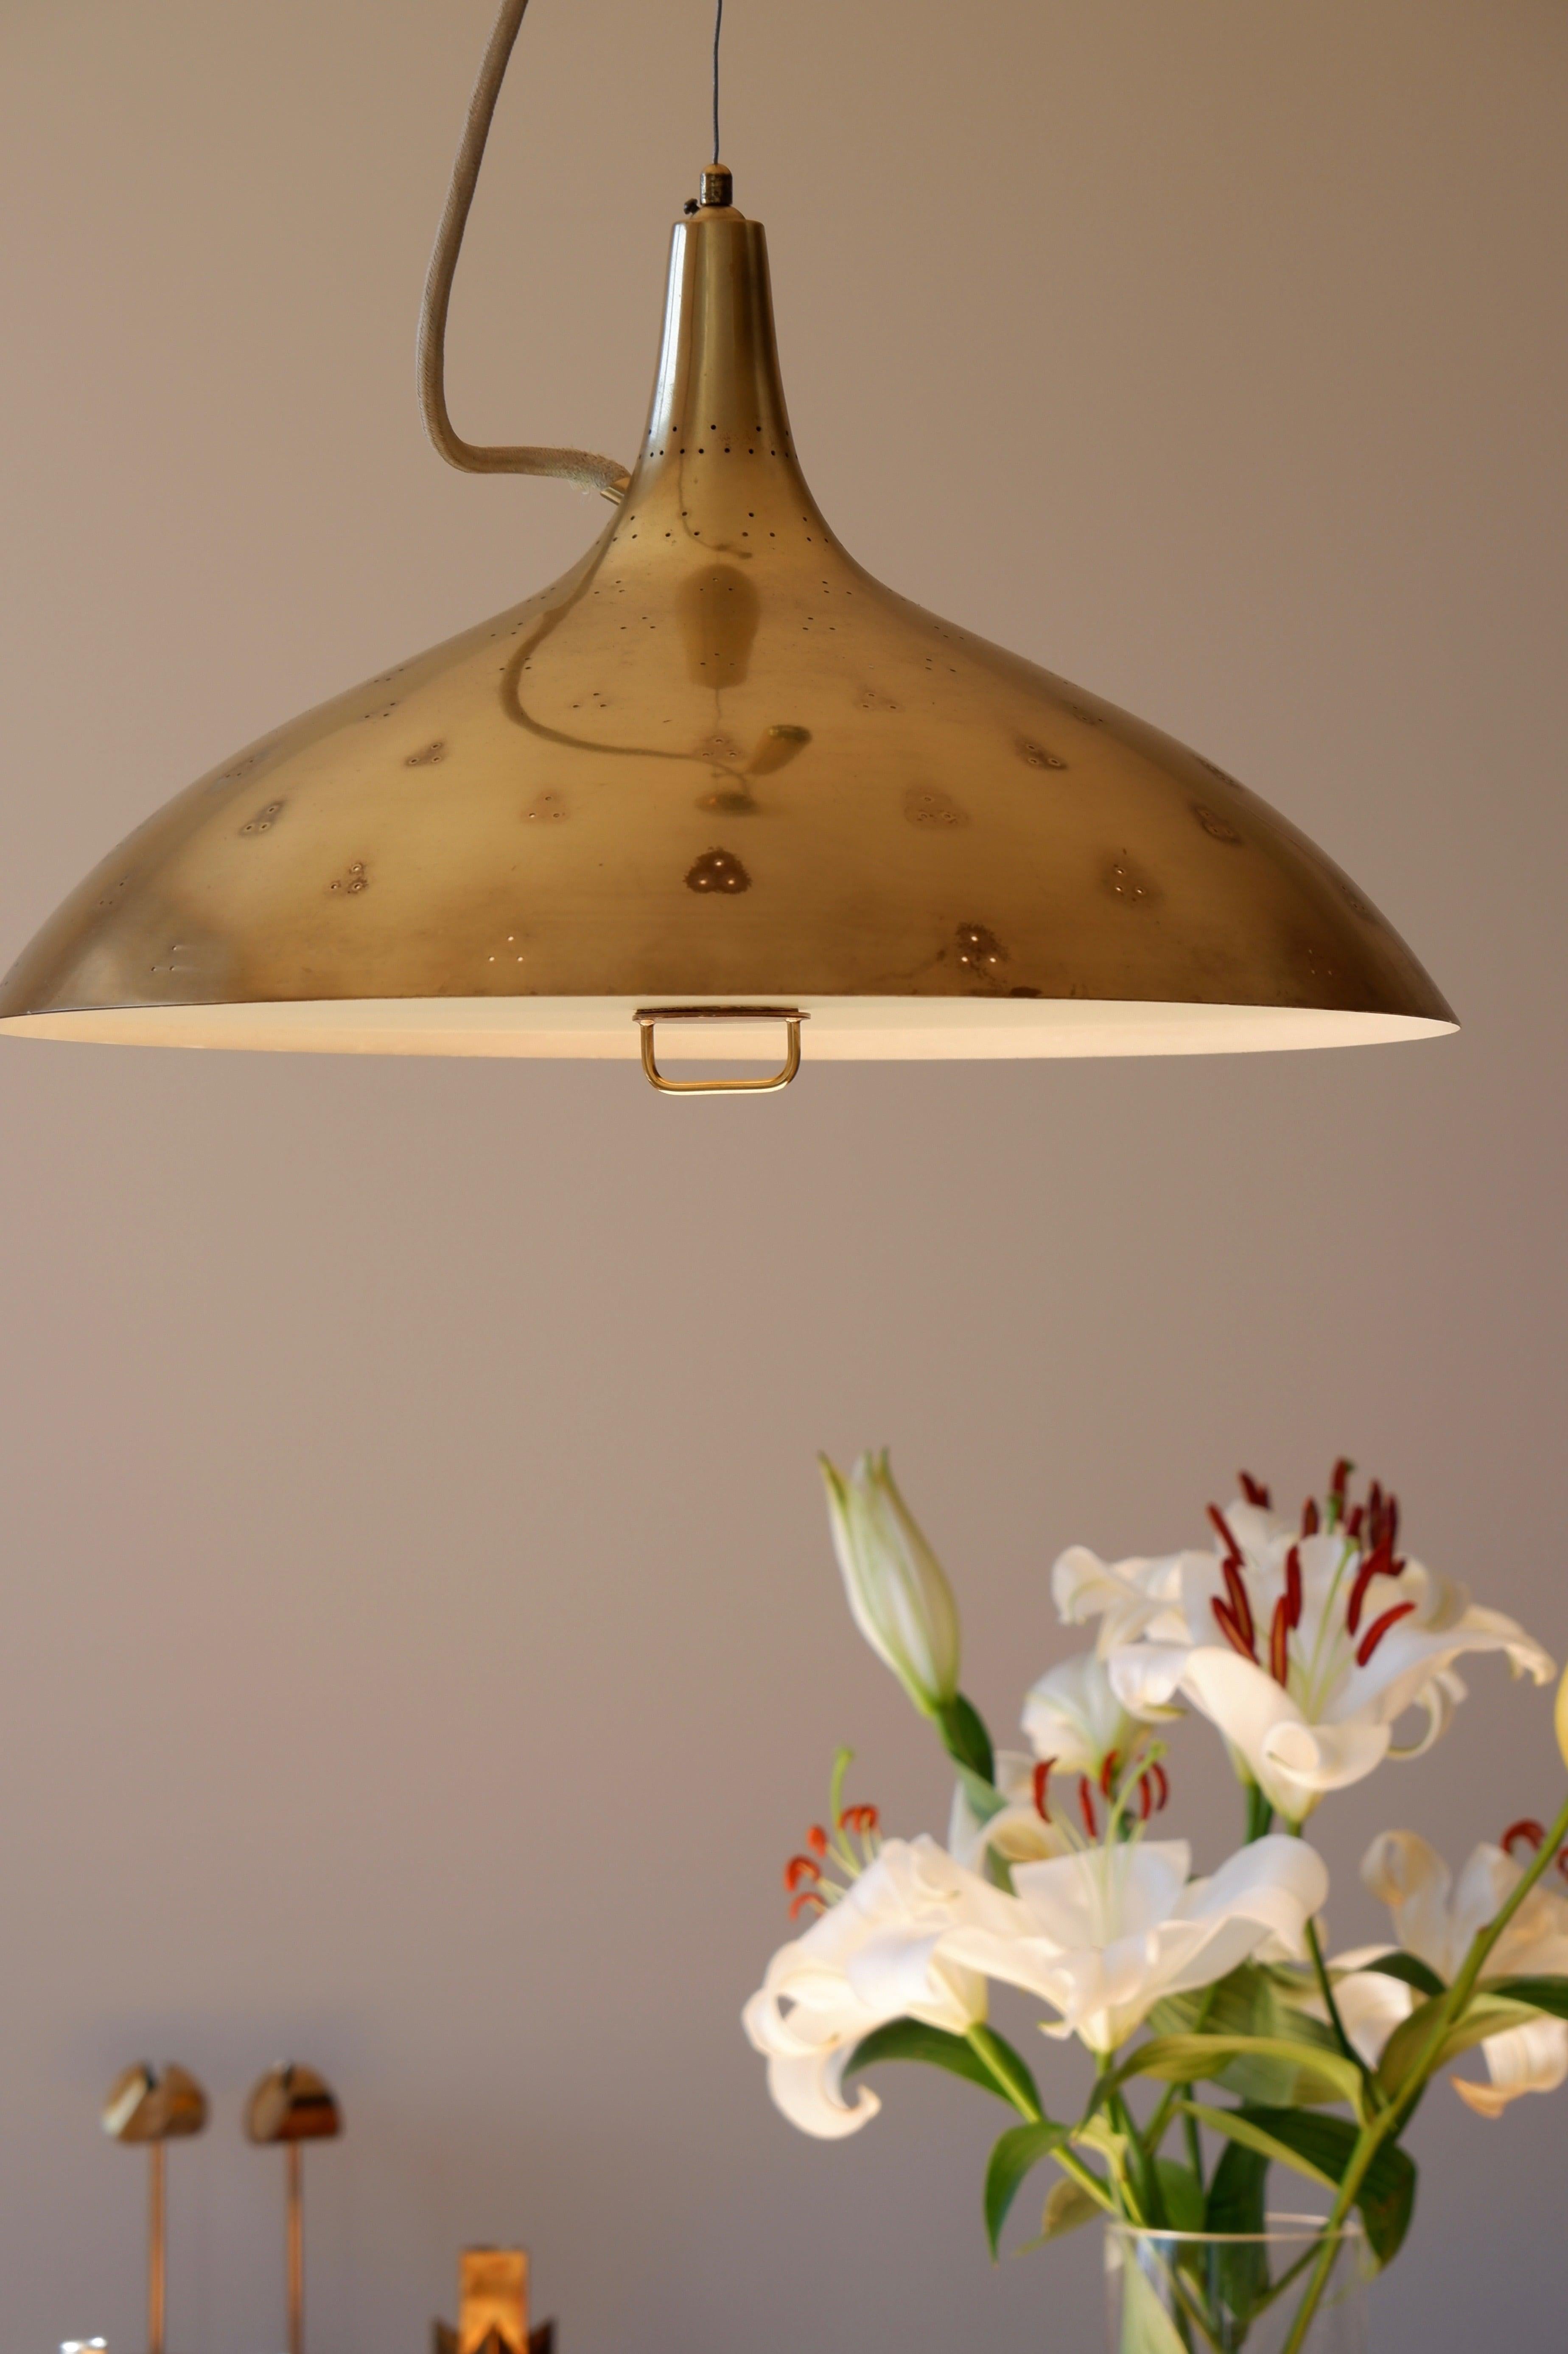 Iconic lamp designed by Paavo Tynell in the 40's and produce by TAITO OY in Finland. This example was manufactured by Taito Oy, which was the first company that Paavo Tynell established already in the 1920s and was known for the highest standards in